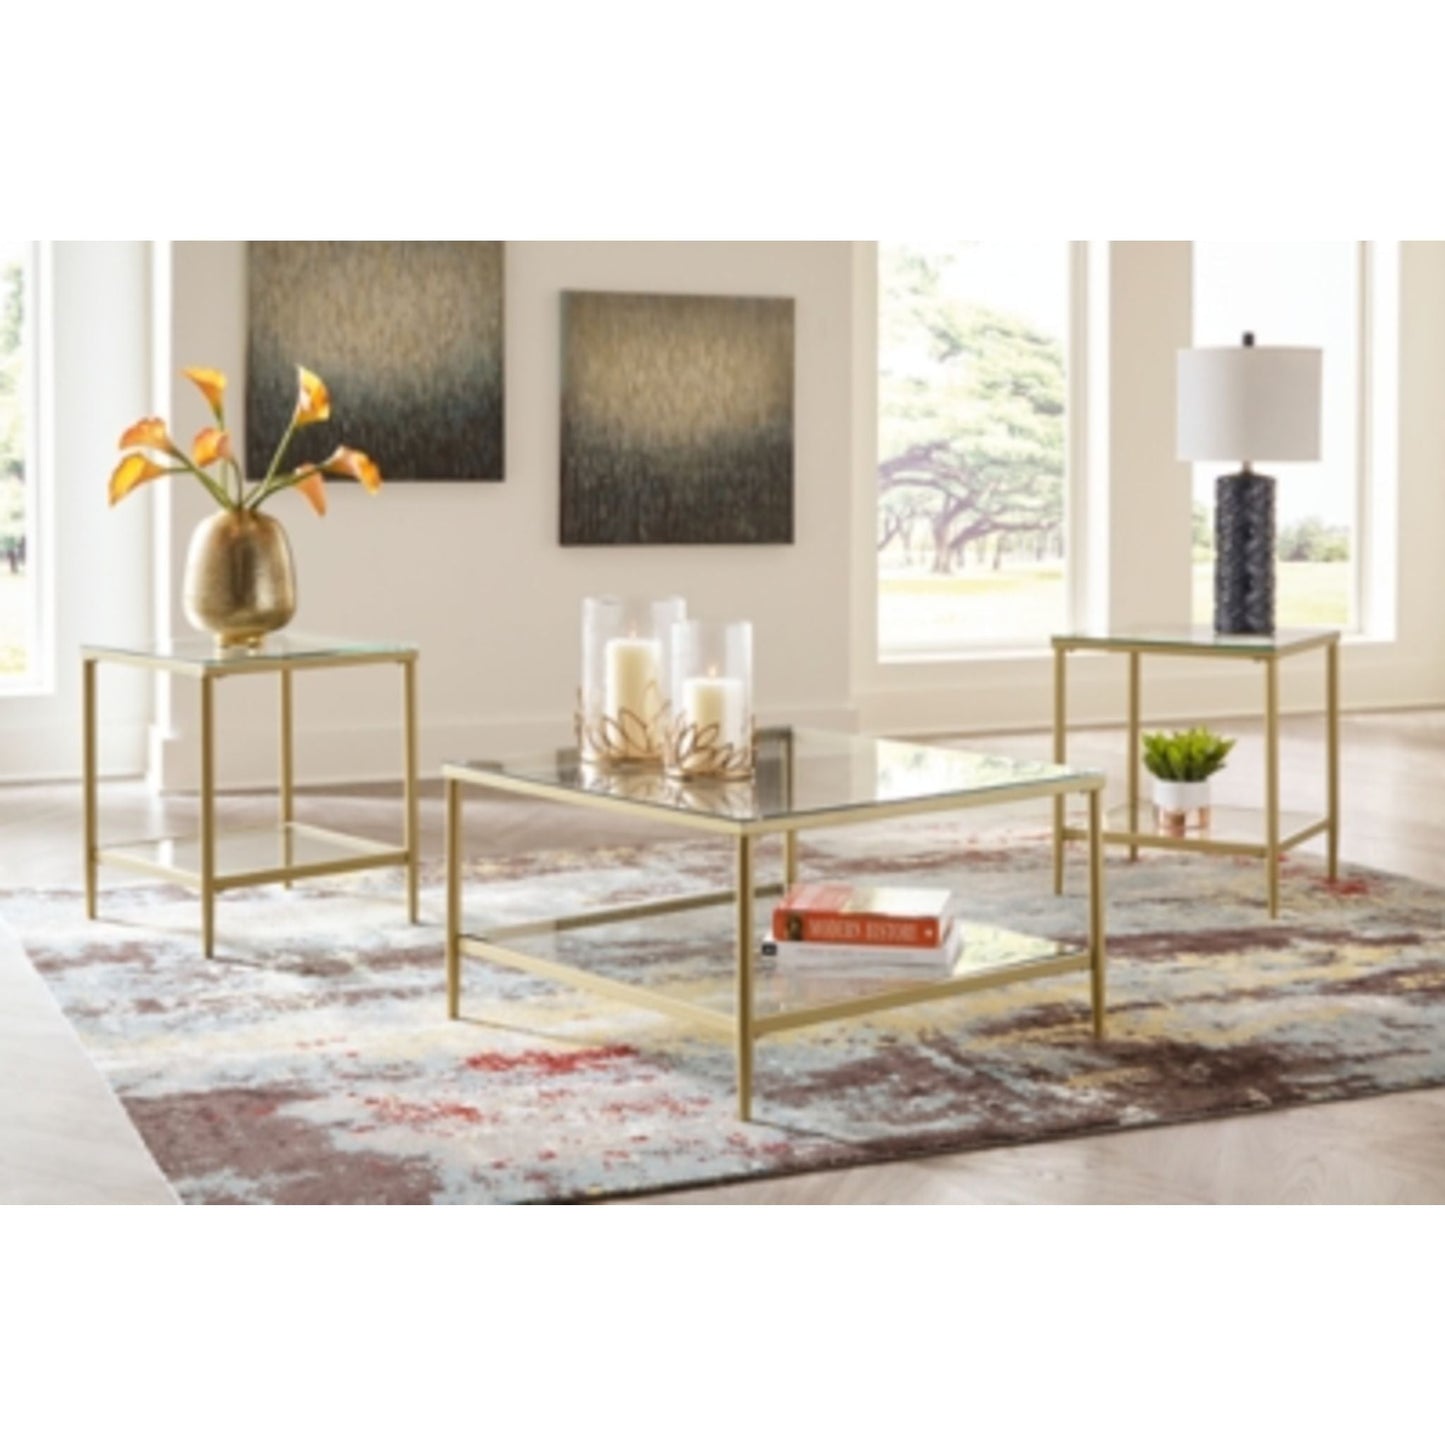 Zerika 3 Pack Tables - Gold Finish